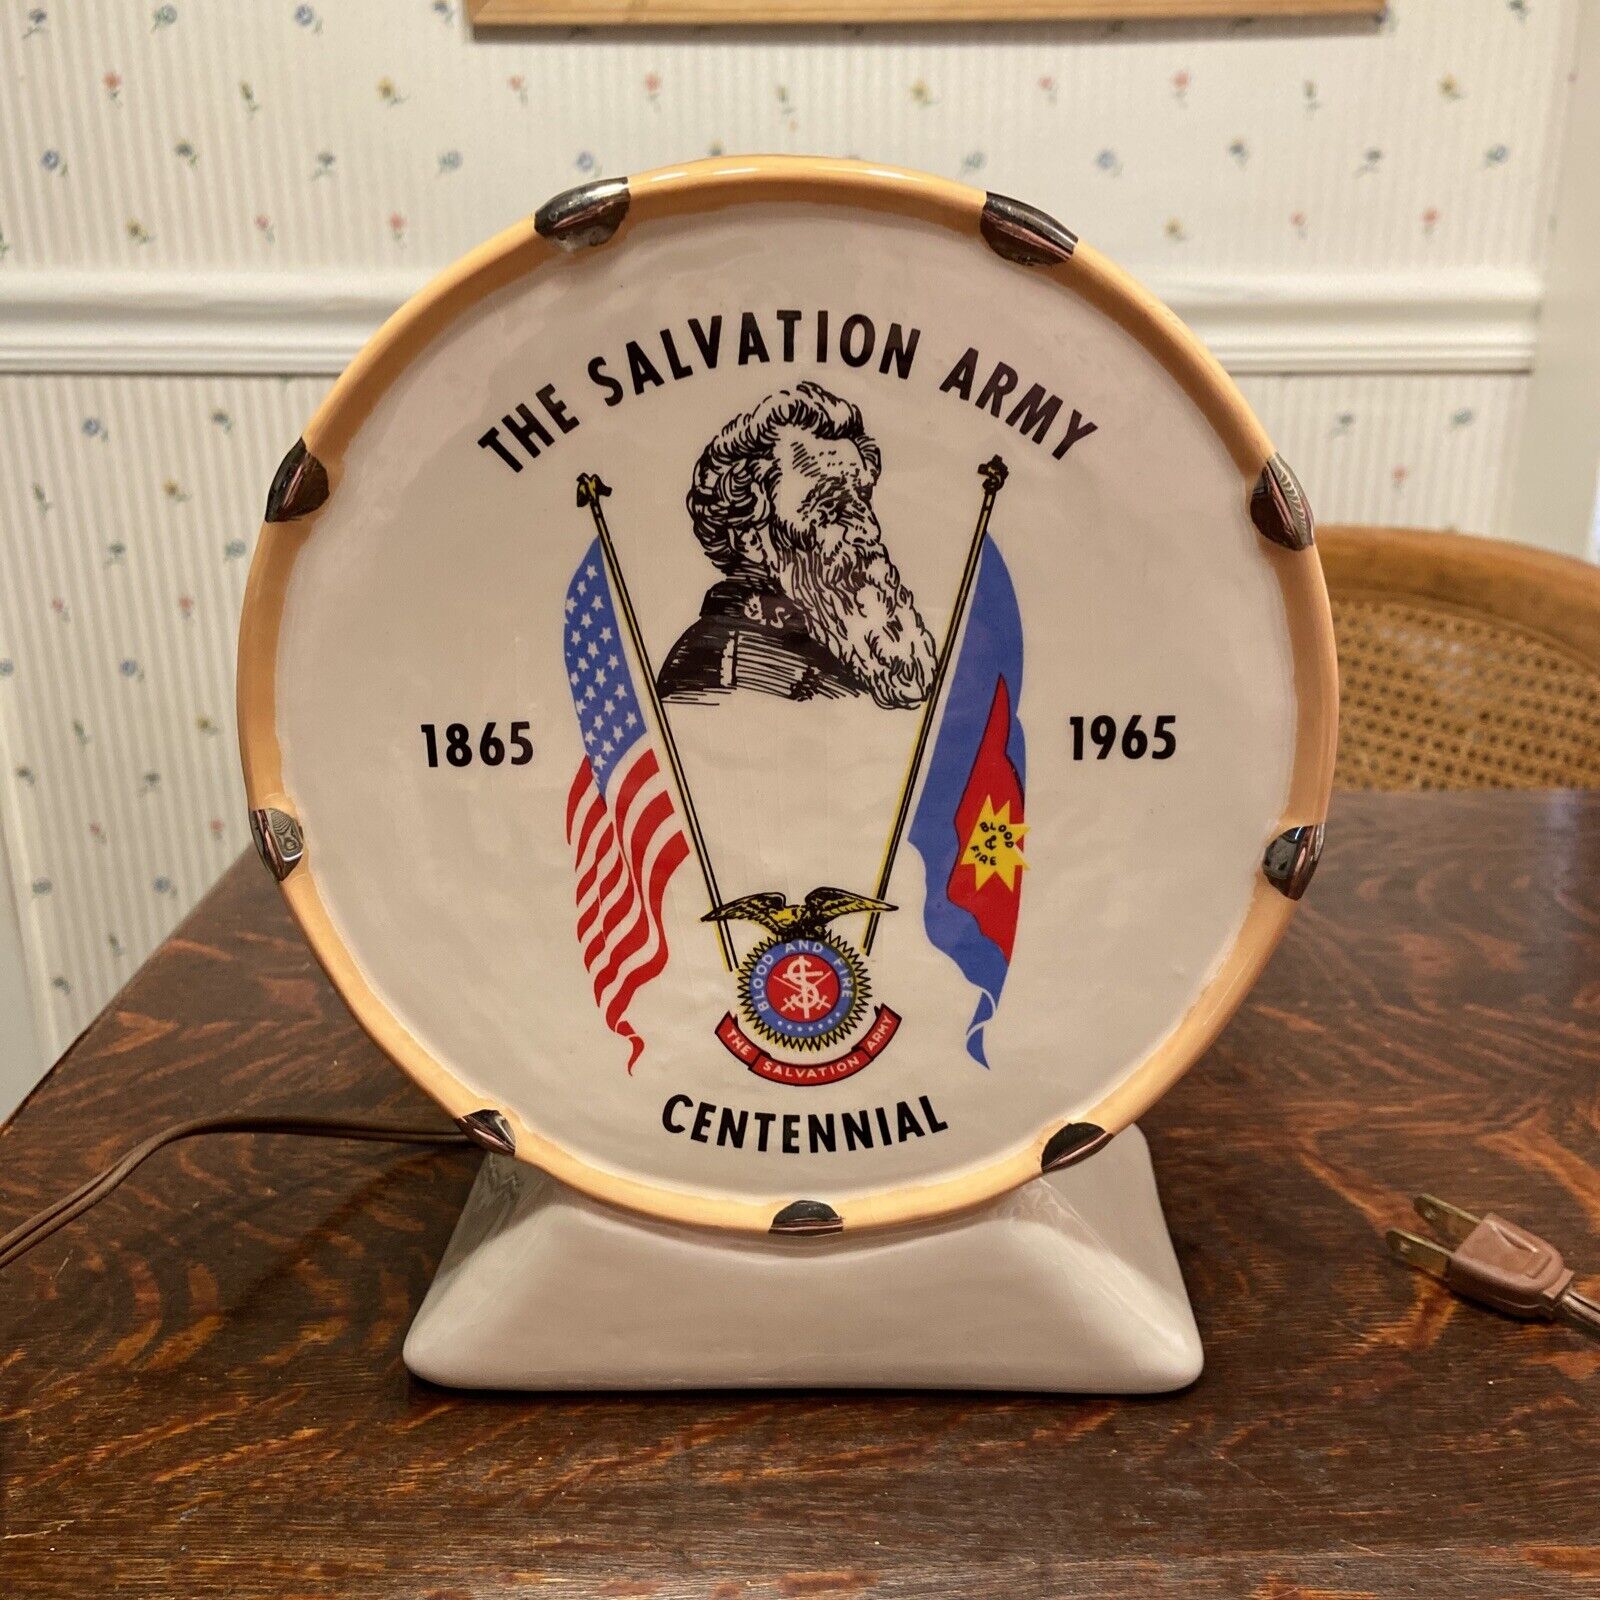 Salvation Army Centennial Lamp 1865-1965 TV Lamp Excellent Condition